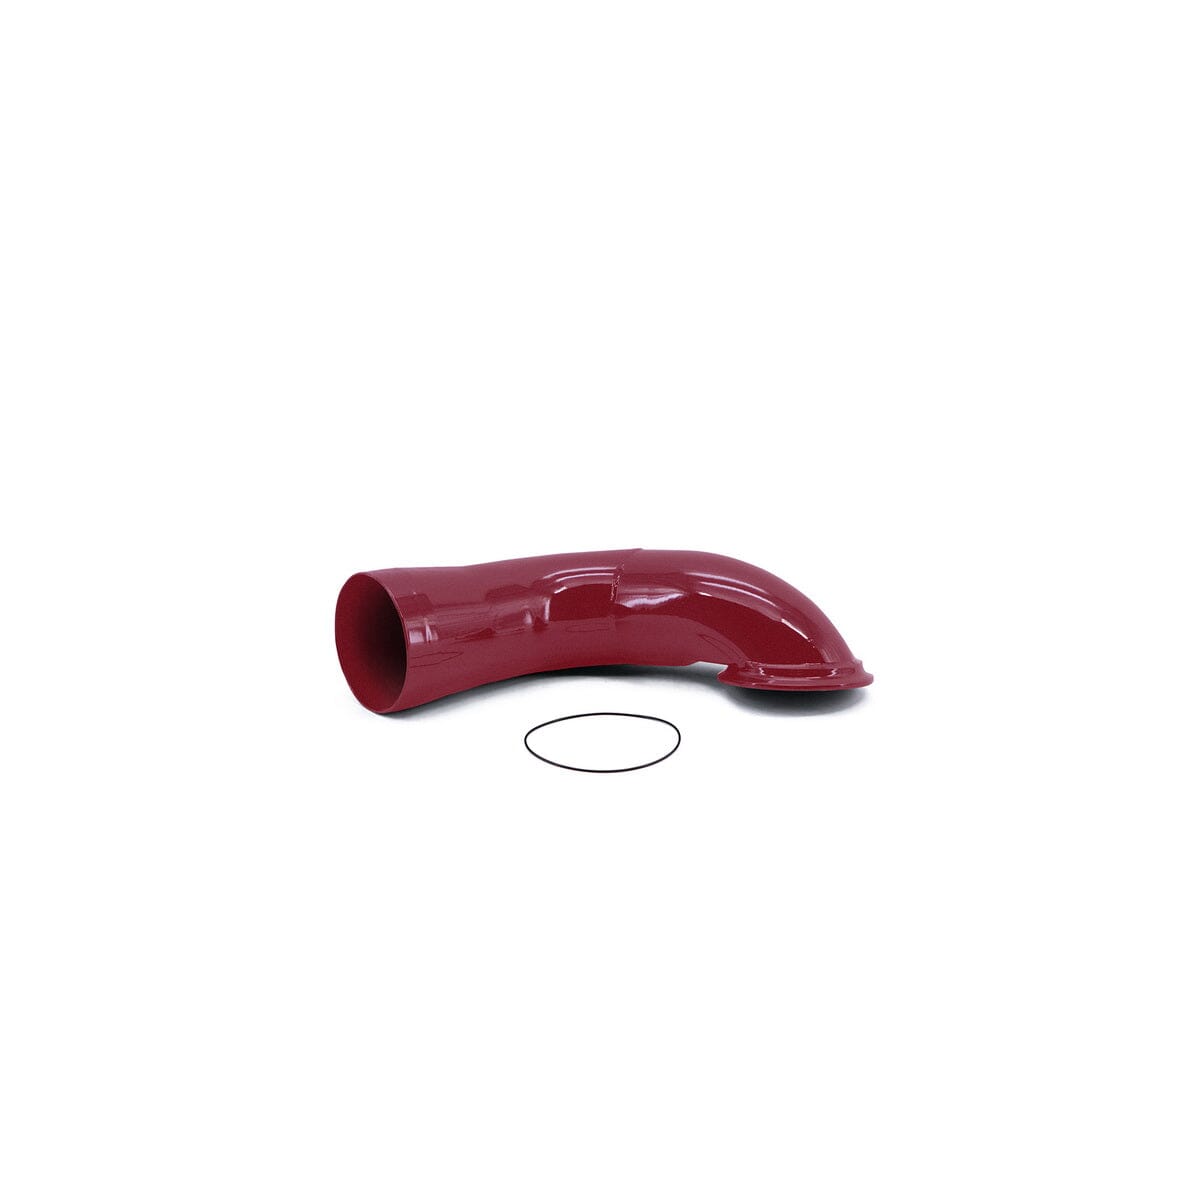 HSP VGT Intake Mouthpiece (2004.5-2010 Chevrolet / GMC) Turbocharger Mounting Kit HSP Diesel Candy Red 